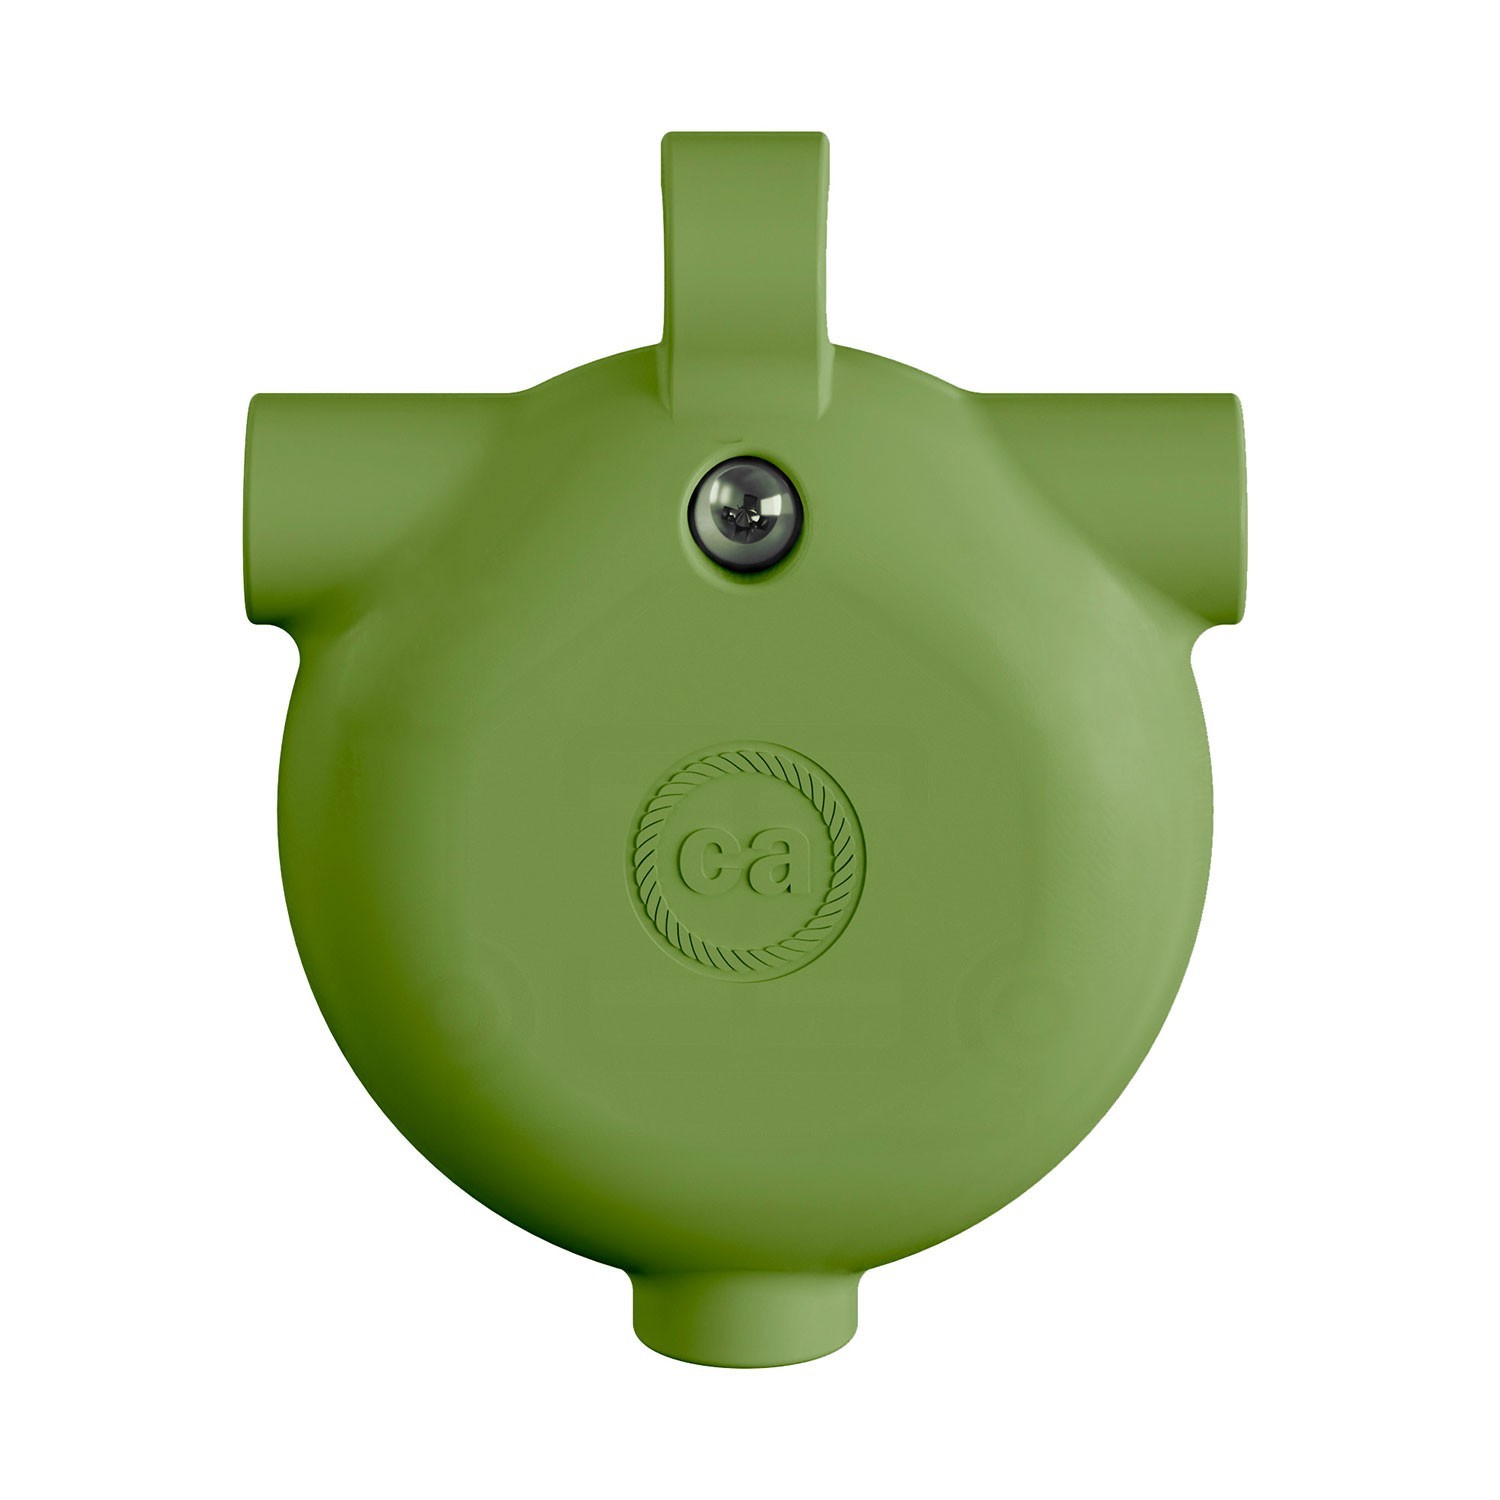 Eiva-3, connection up to 3 ways for outdoor use and IP65 rating